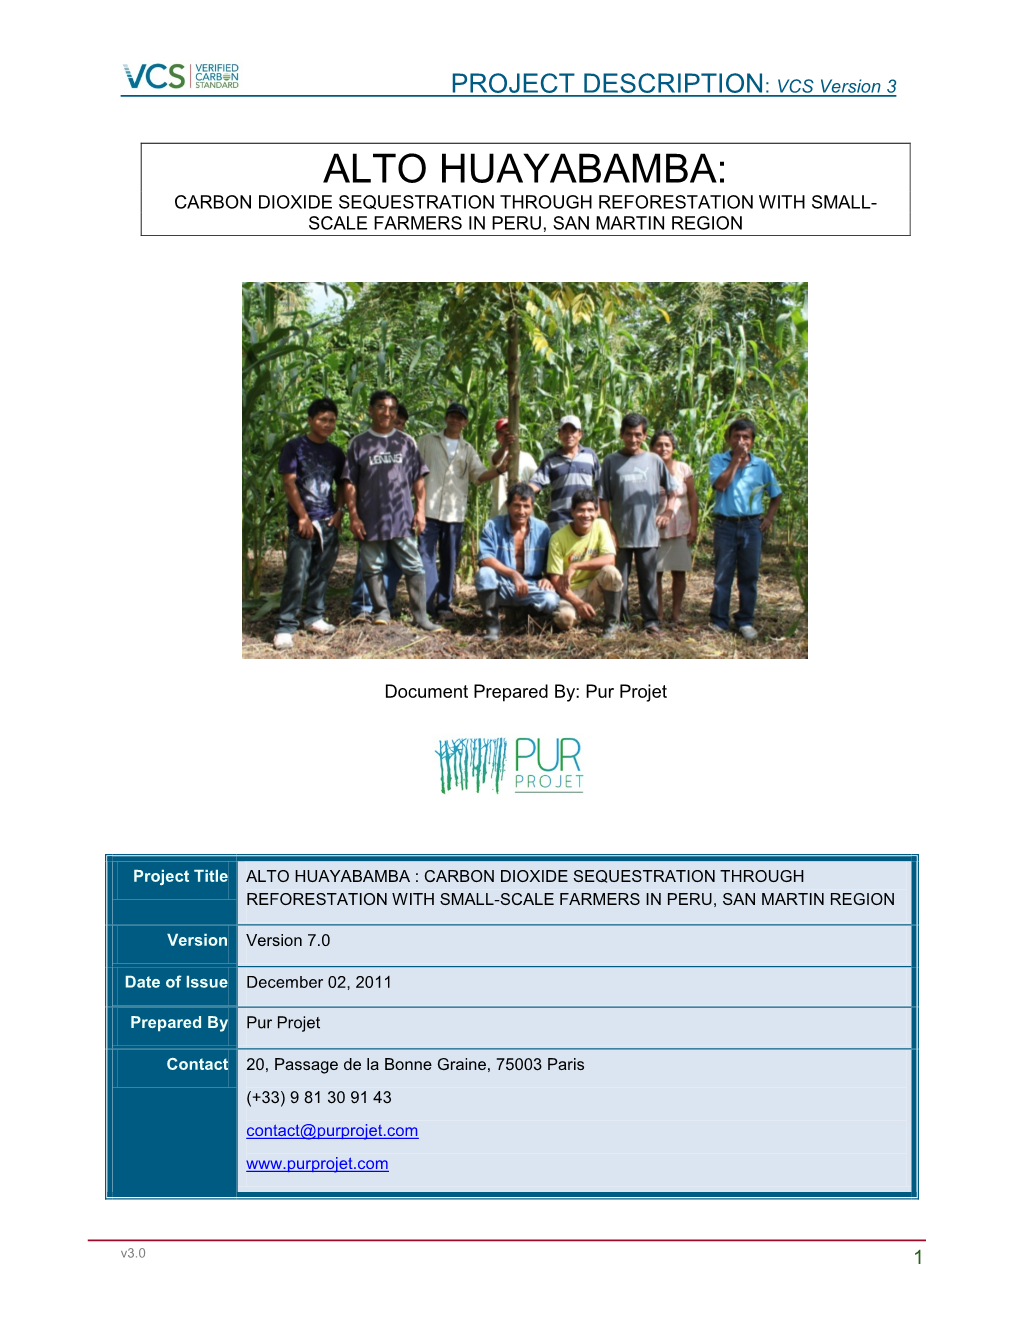 Alto Huayabamba: Carbon Dioxide Sequestration Through Reforestation with Small- Scale Farmers in Peru, San Martin Region